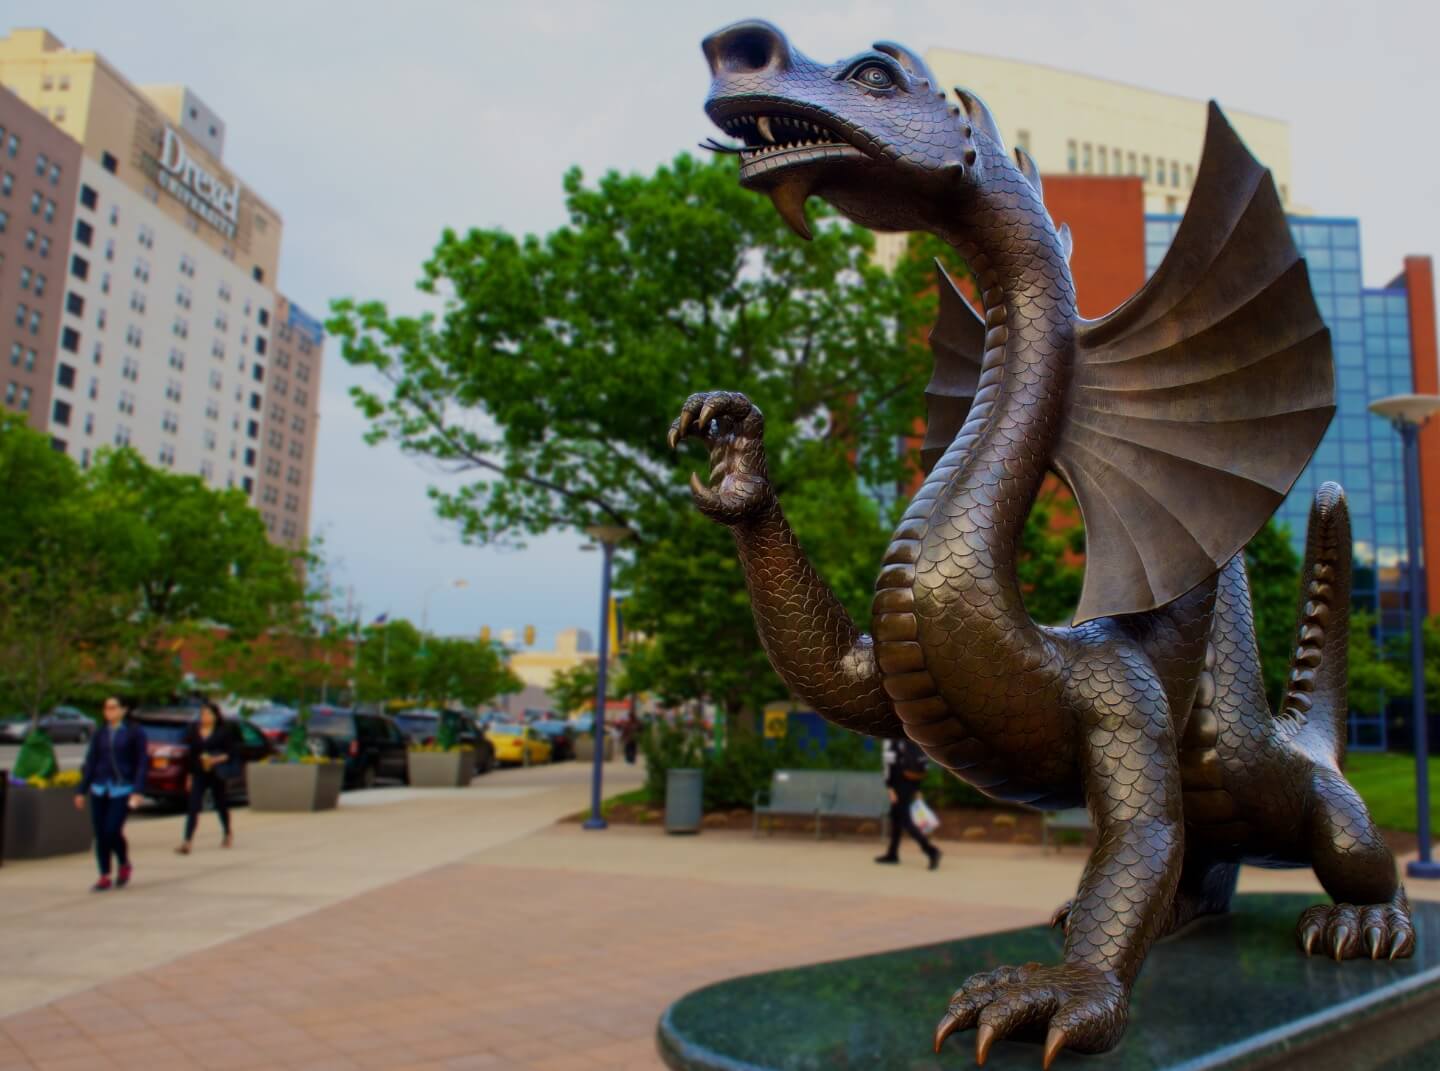 The dragon statue bares its claws at dusk on the Drexel LeBow College of Business campus.